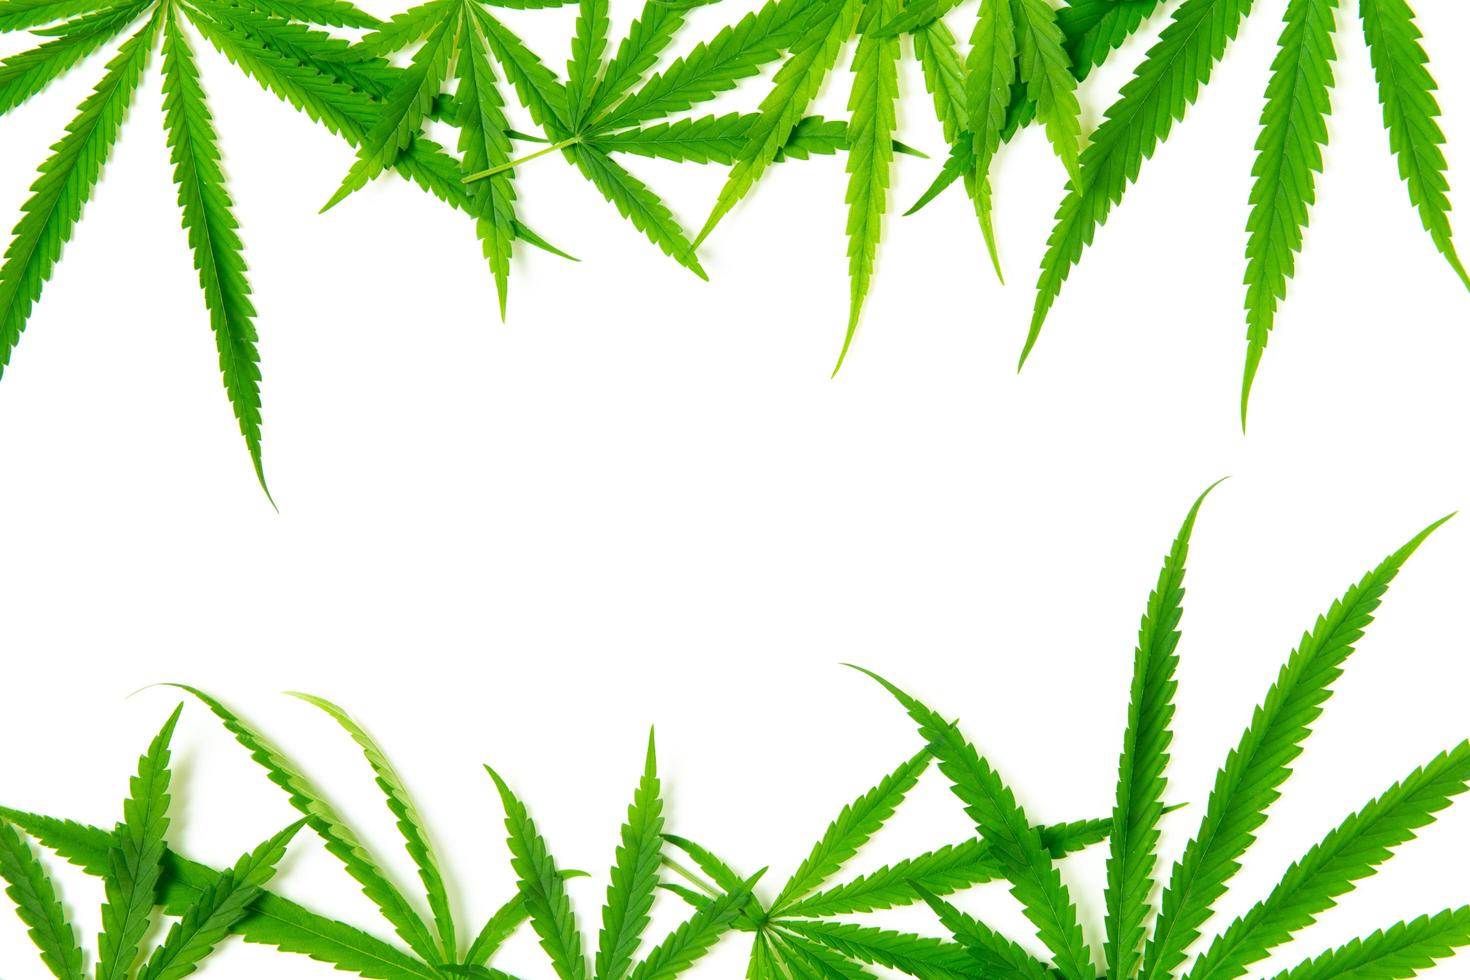 Top view of Cannabis leaf on white background,The leaves of the cannabis plant are rich in antioxidants, photo